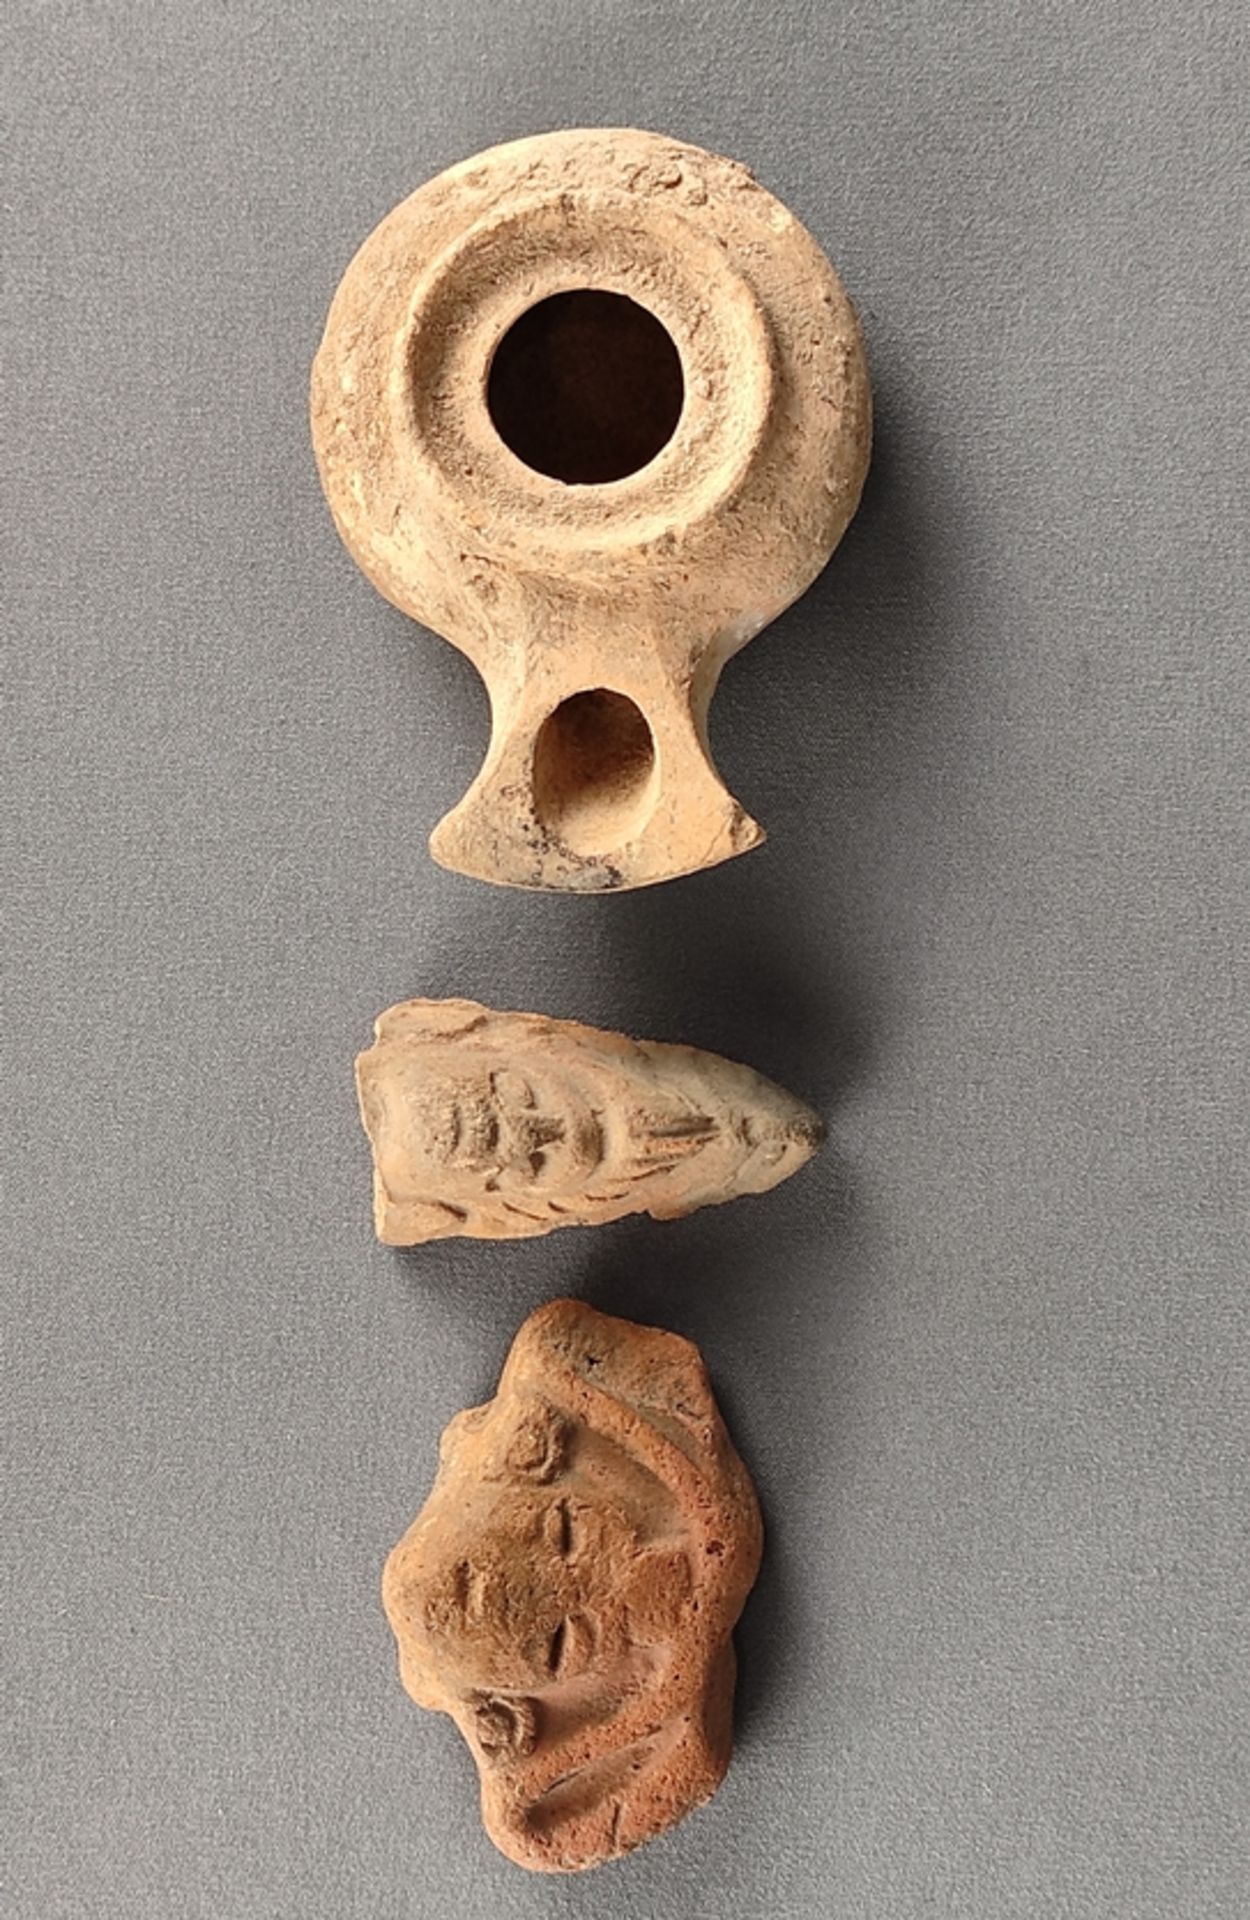 Terracotta convolute, one oil lamp, so called frog, 2,5x9x6,5 cm, and two figurine fragments, l 6cm